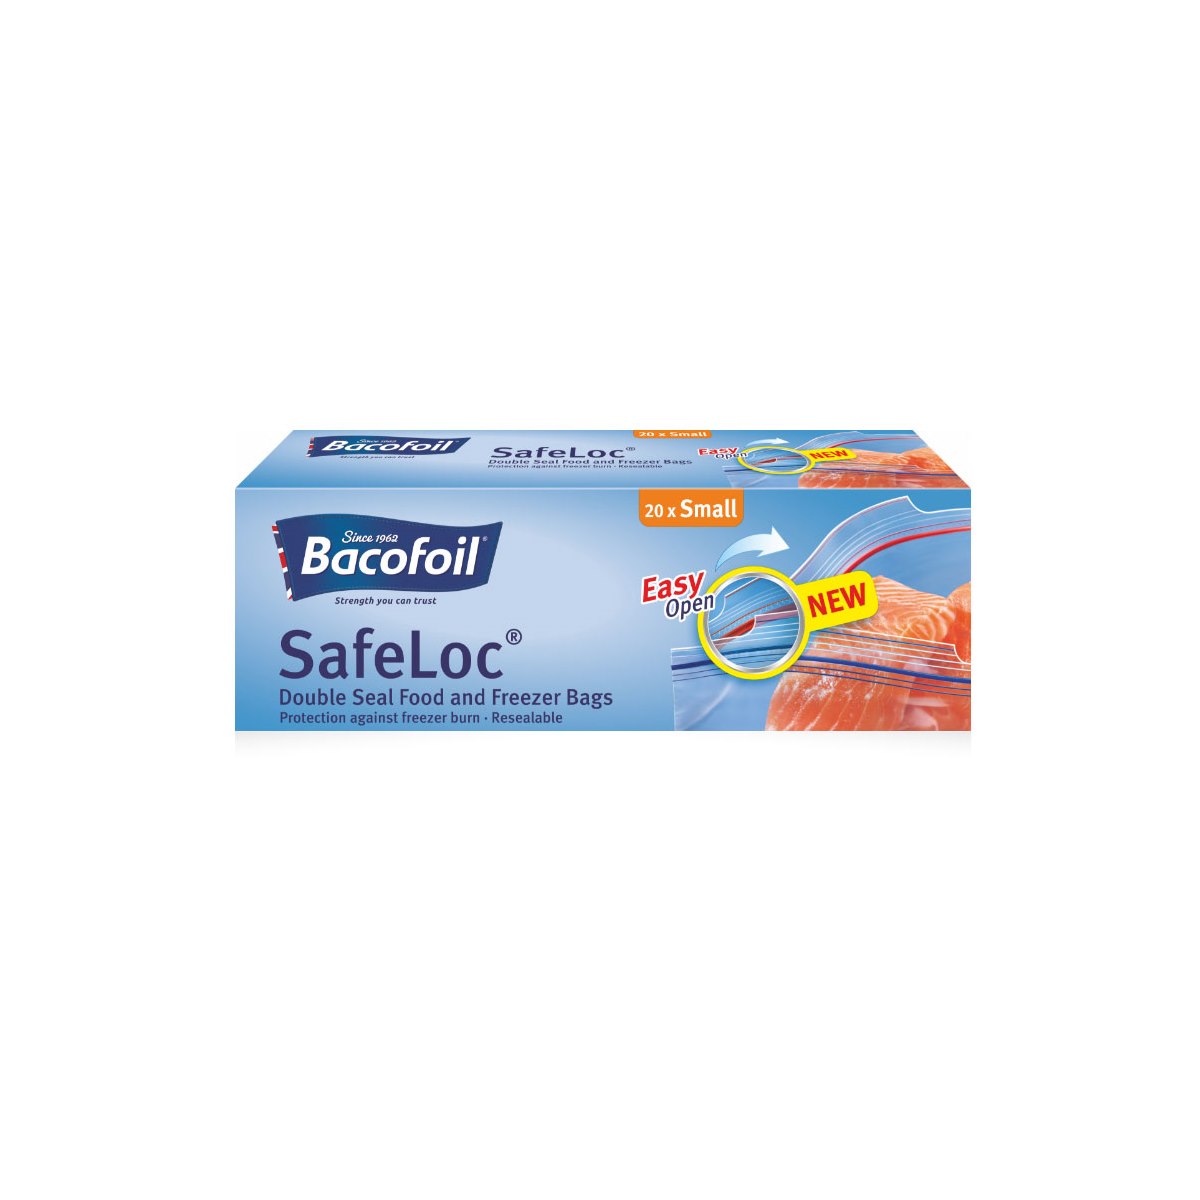 BacoFoil Safeloc Food and Freezer Bags 20 Small